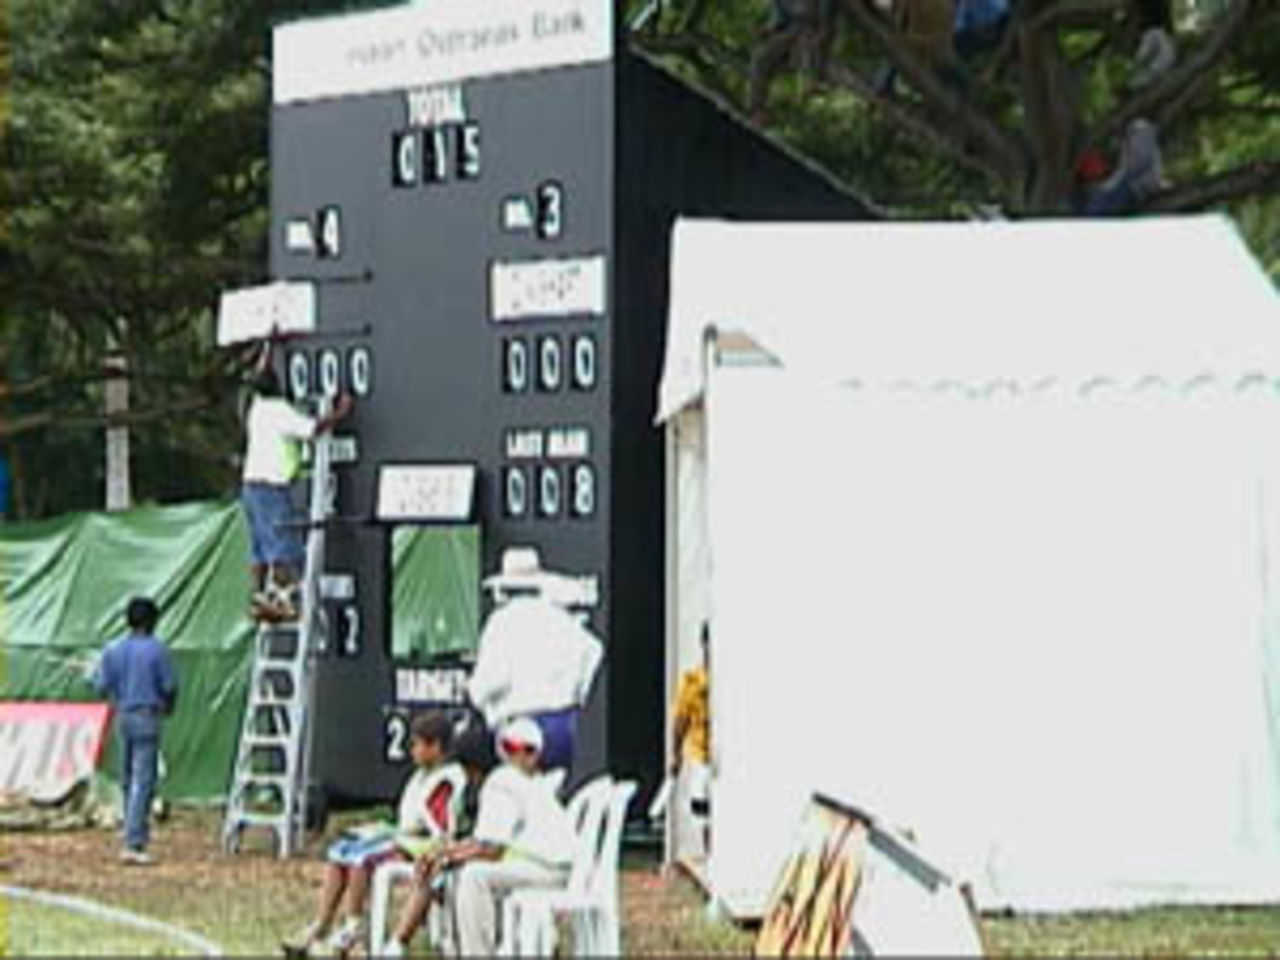 Changing the scores is not an easy job, especially when the Zimbabwe wickets fall so often, India v Zimbabwe (2nd ODI), Coca-Cola Singapore Challenge, 1999-2000, Kallang Ground, Singapore, 4 Sep 1999